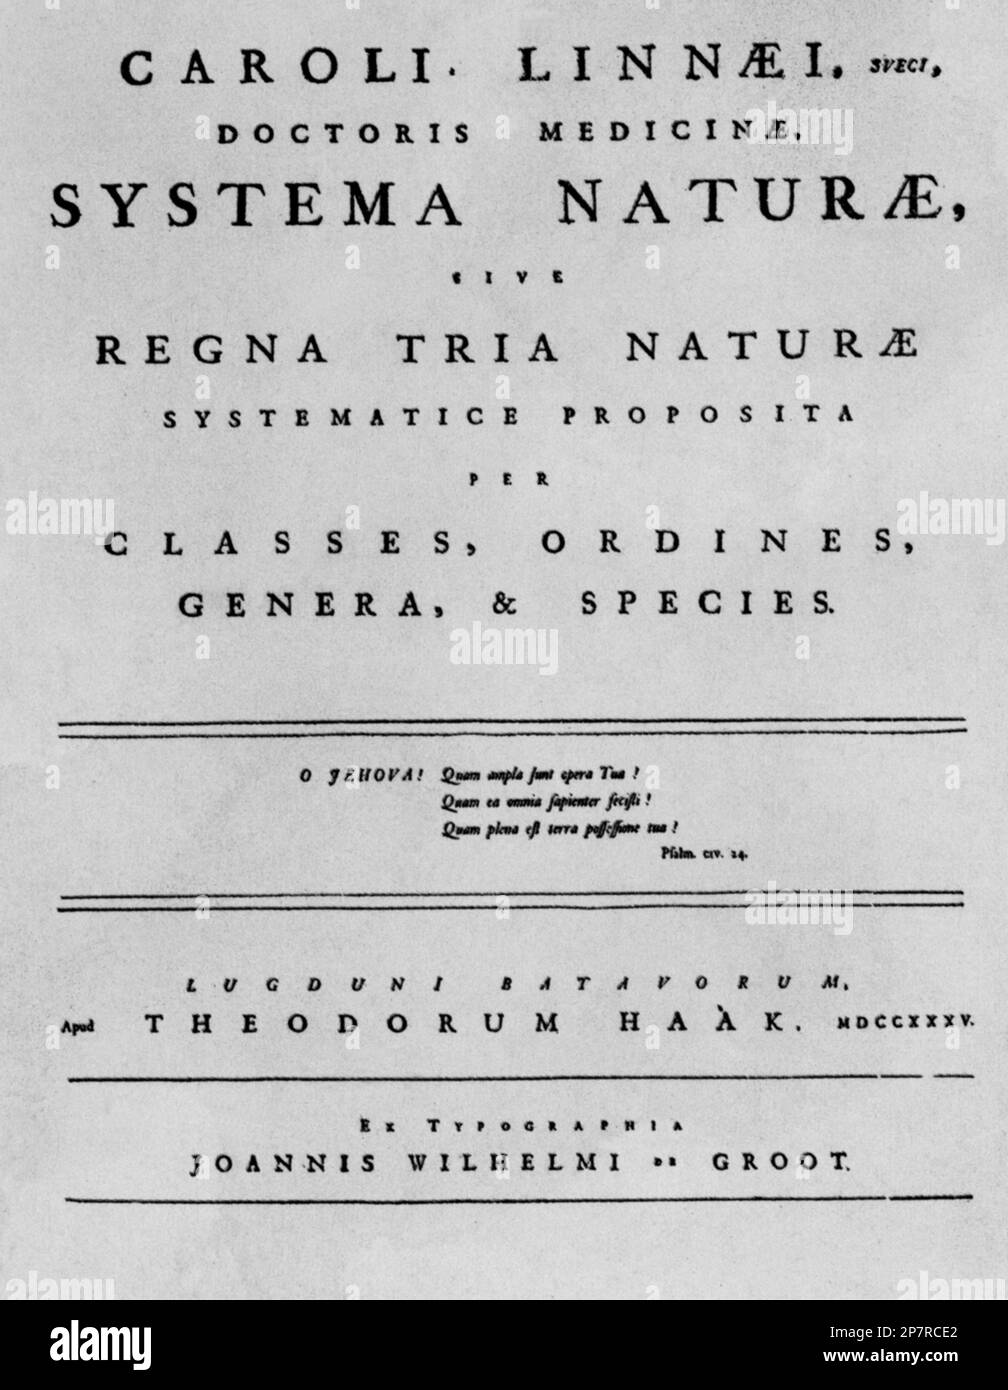 Carolus Linnaeus ( CARLO LINNEO , CARL Von LINNE' , 1707 - 1778 )  was a Swedish botanist, physician and zoologist[2] who laid the foundations for the modern scheme of nomenclature . In this photo the frontespice of first edition of SYSTEMA NATURAE ( Leida , 1735 ) . He is known as the ' father of modern taxonomy '.  He is also considered one of the fathers of modern ecology . He was the most renowned botanist of his time, and also noted for his fine linguistic skills .  - ECOLOGIA - ECOLOGISTA - SVEZIA - SISTEMATICA - BOTANICA - BOTANICO - DOTTORE - MEDICO - MEDICINA - medicine  - SCIENZA - S Stock Photo